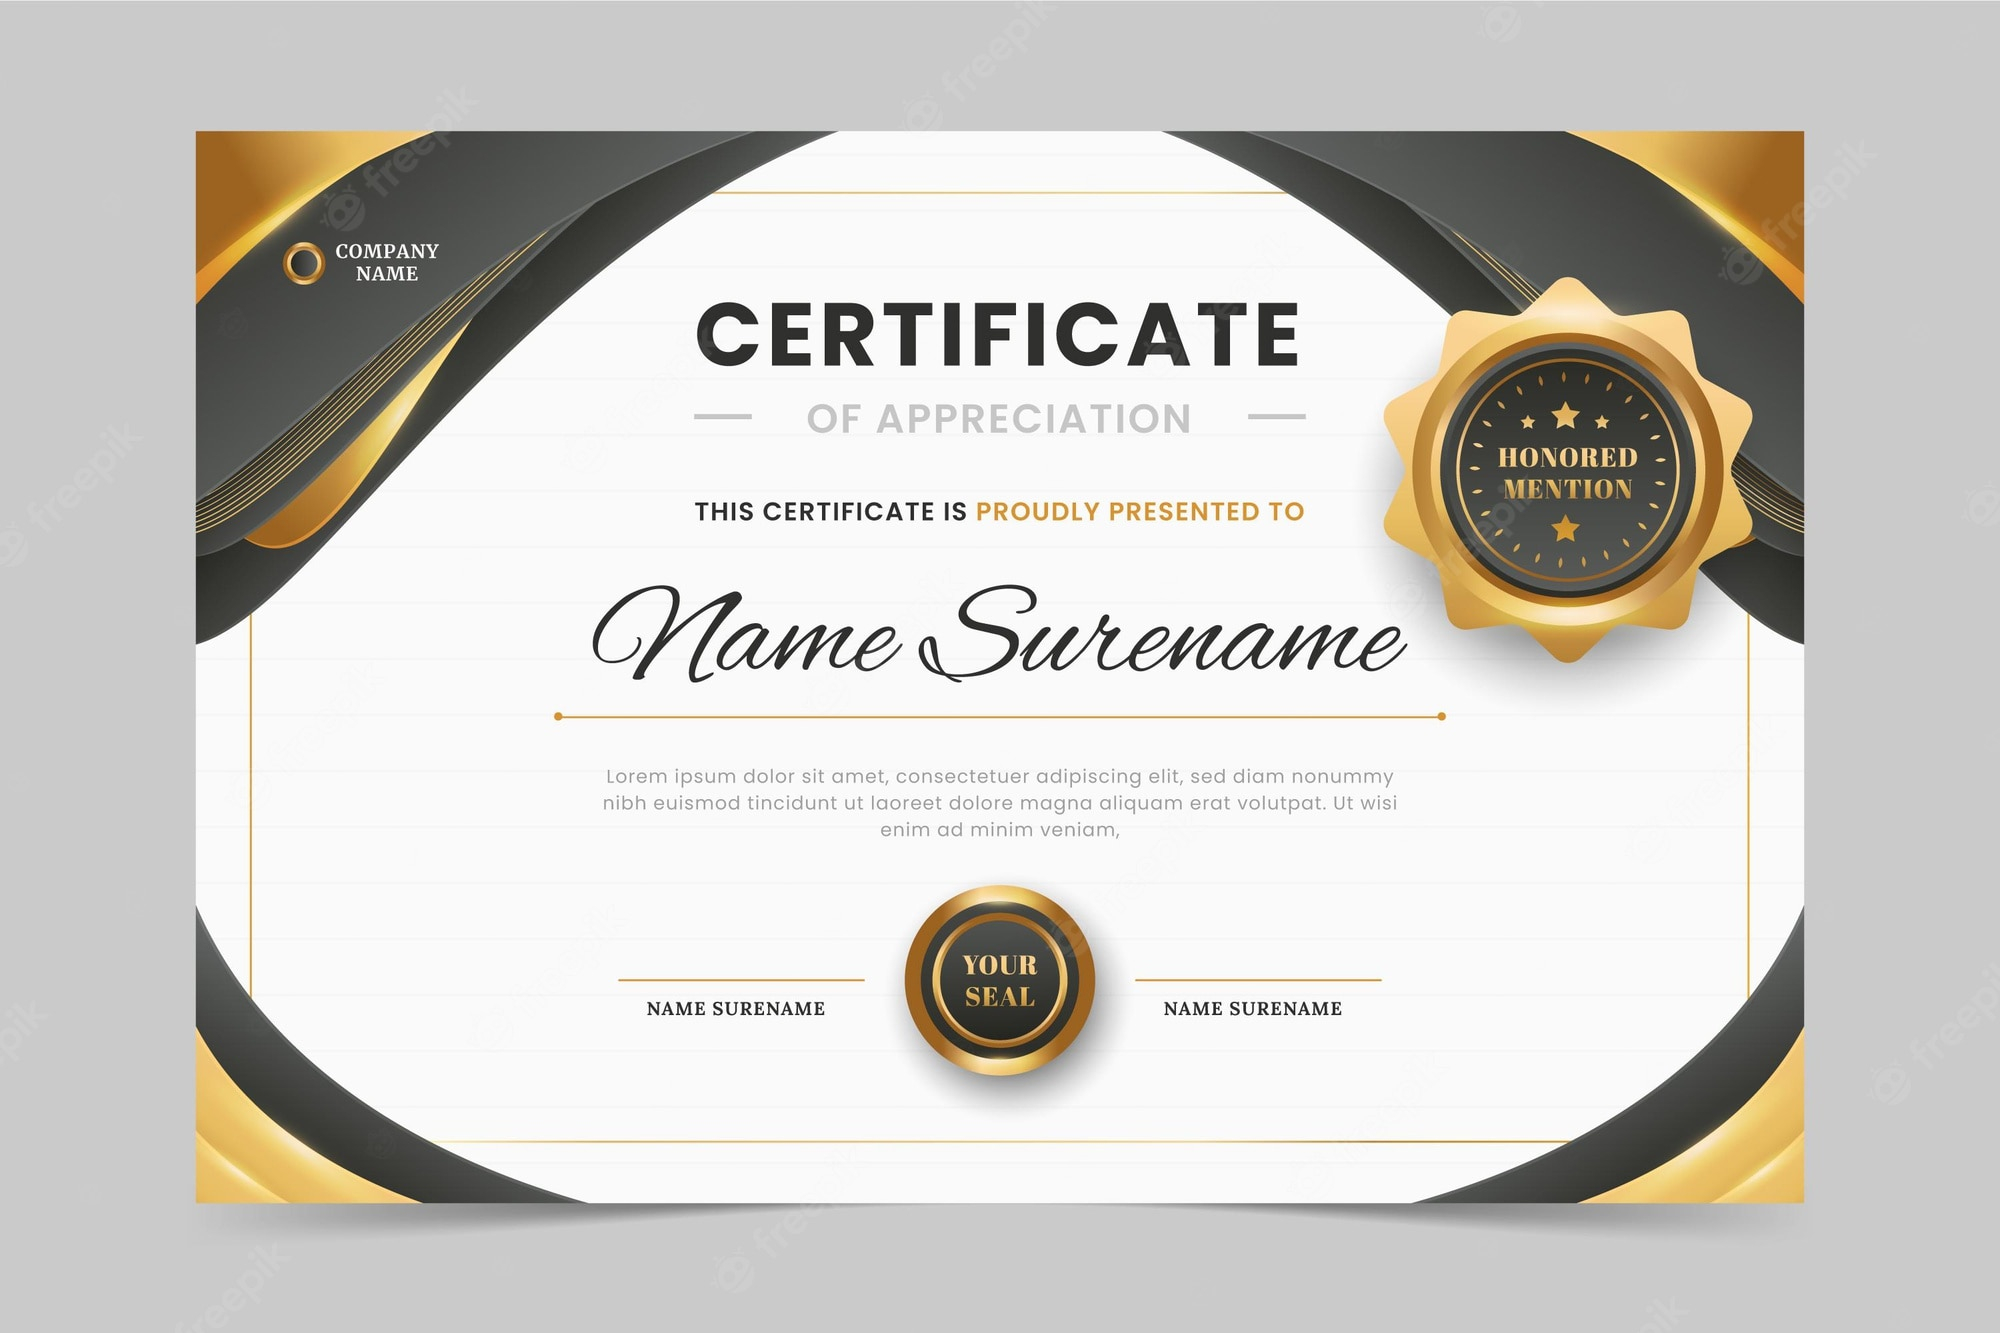 Employee certificate Images  Free Vectors, Stock Photos & PSD Intended For Employee Of The Month Certificate Template With Picture